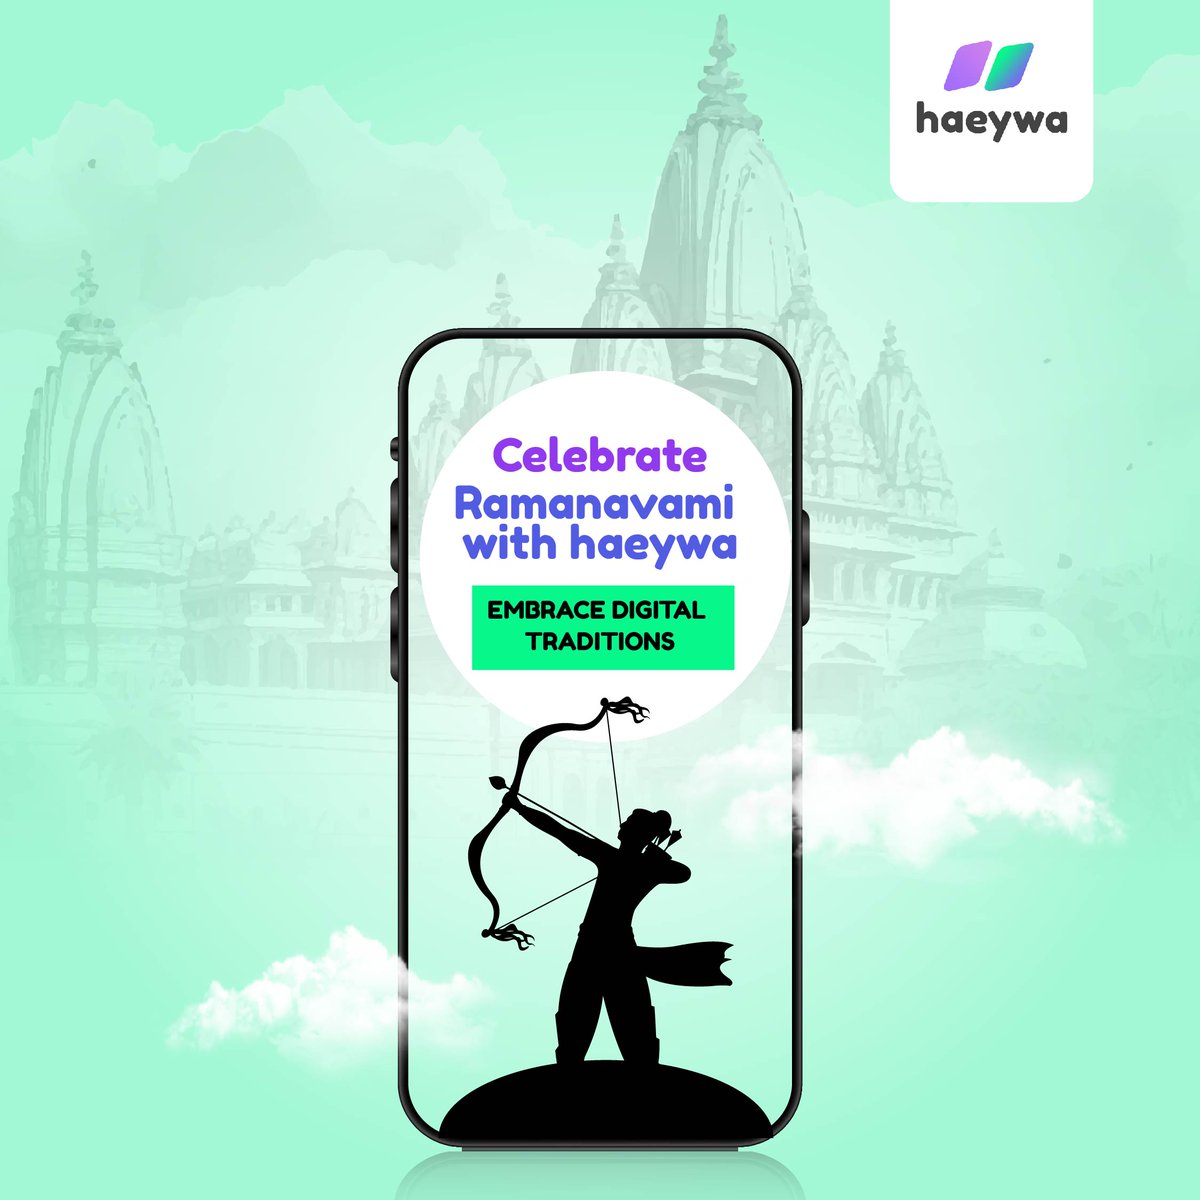 May this auspicious occasion of Ramanavami bring joy, prosperity, and seamless expense management with haeywa! Wishing you a blessed Ramanavami filled with digital convenience and traditional warmth.
.
.
.
#haeywaApp #ExpenseManagement #FinancialControl